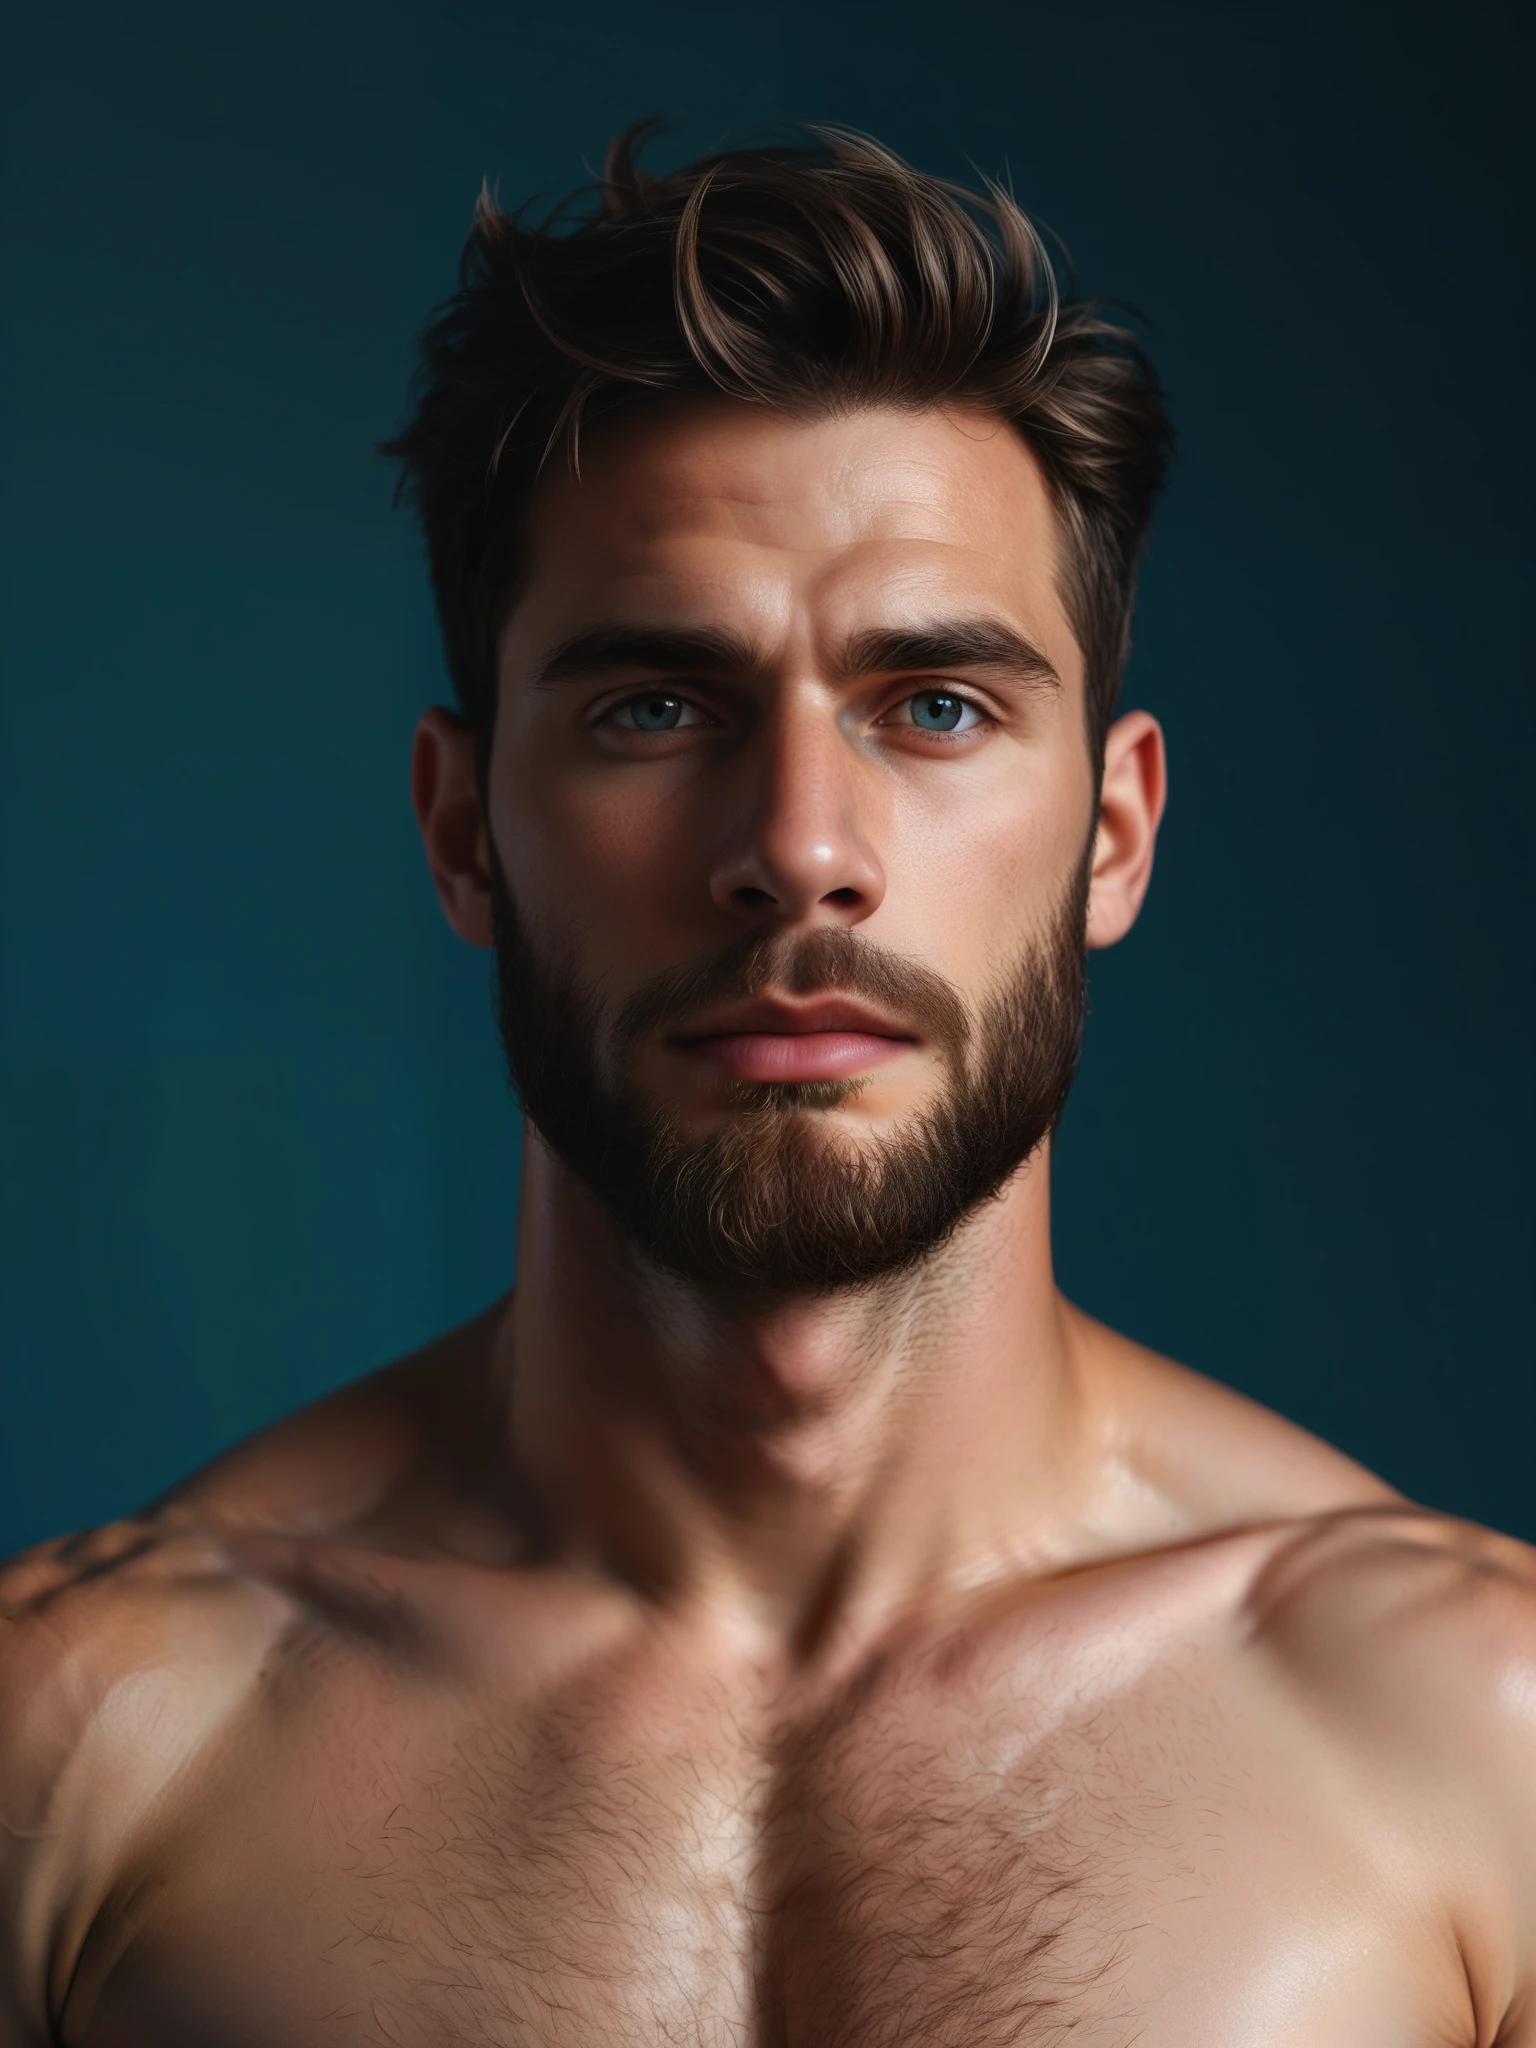 a man, shirtless, chest showing, body hair, big beard, front view
